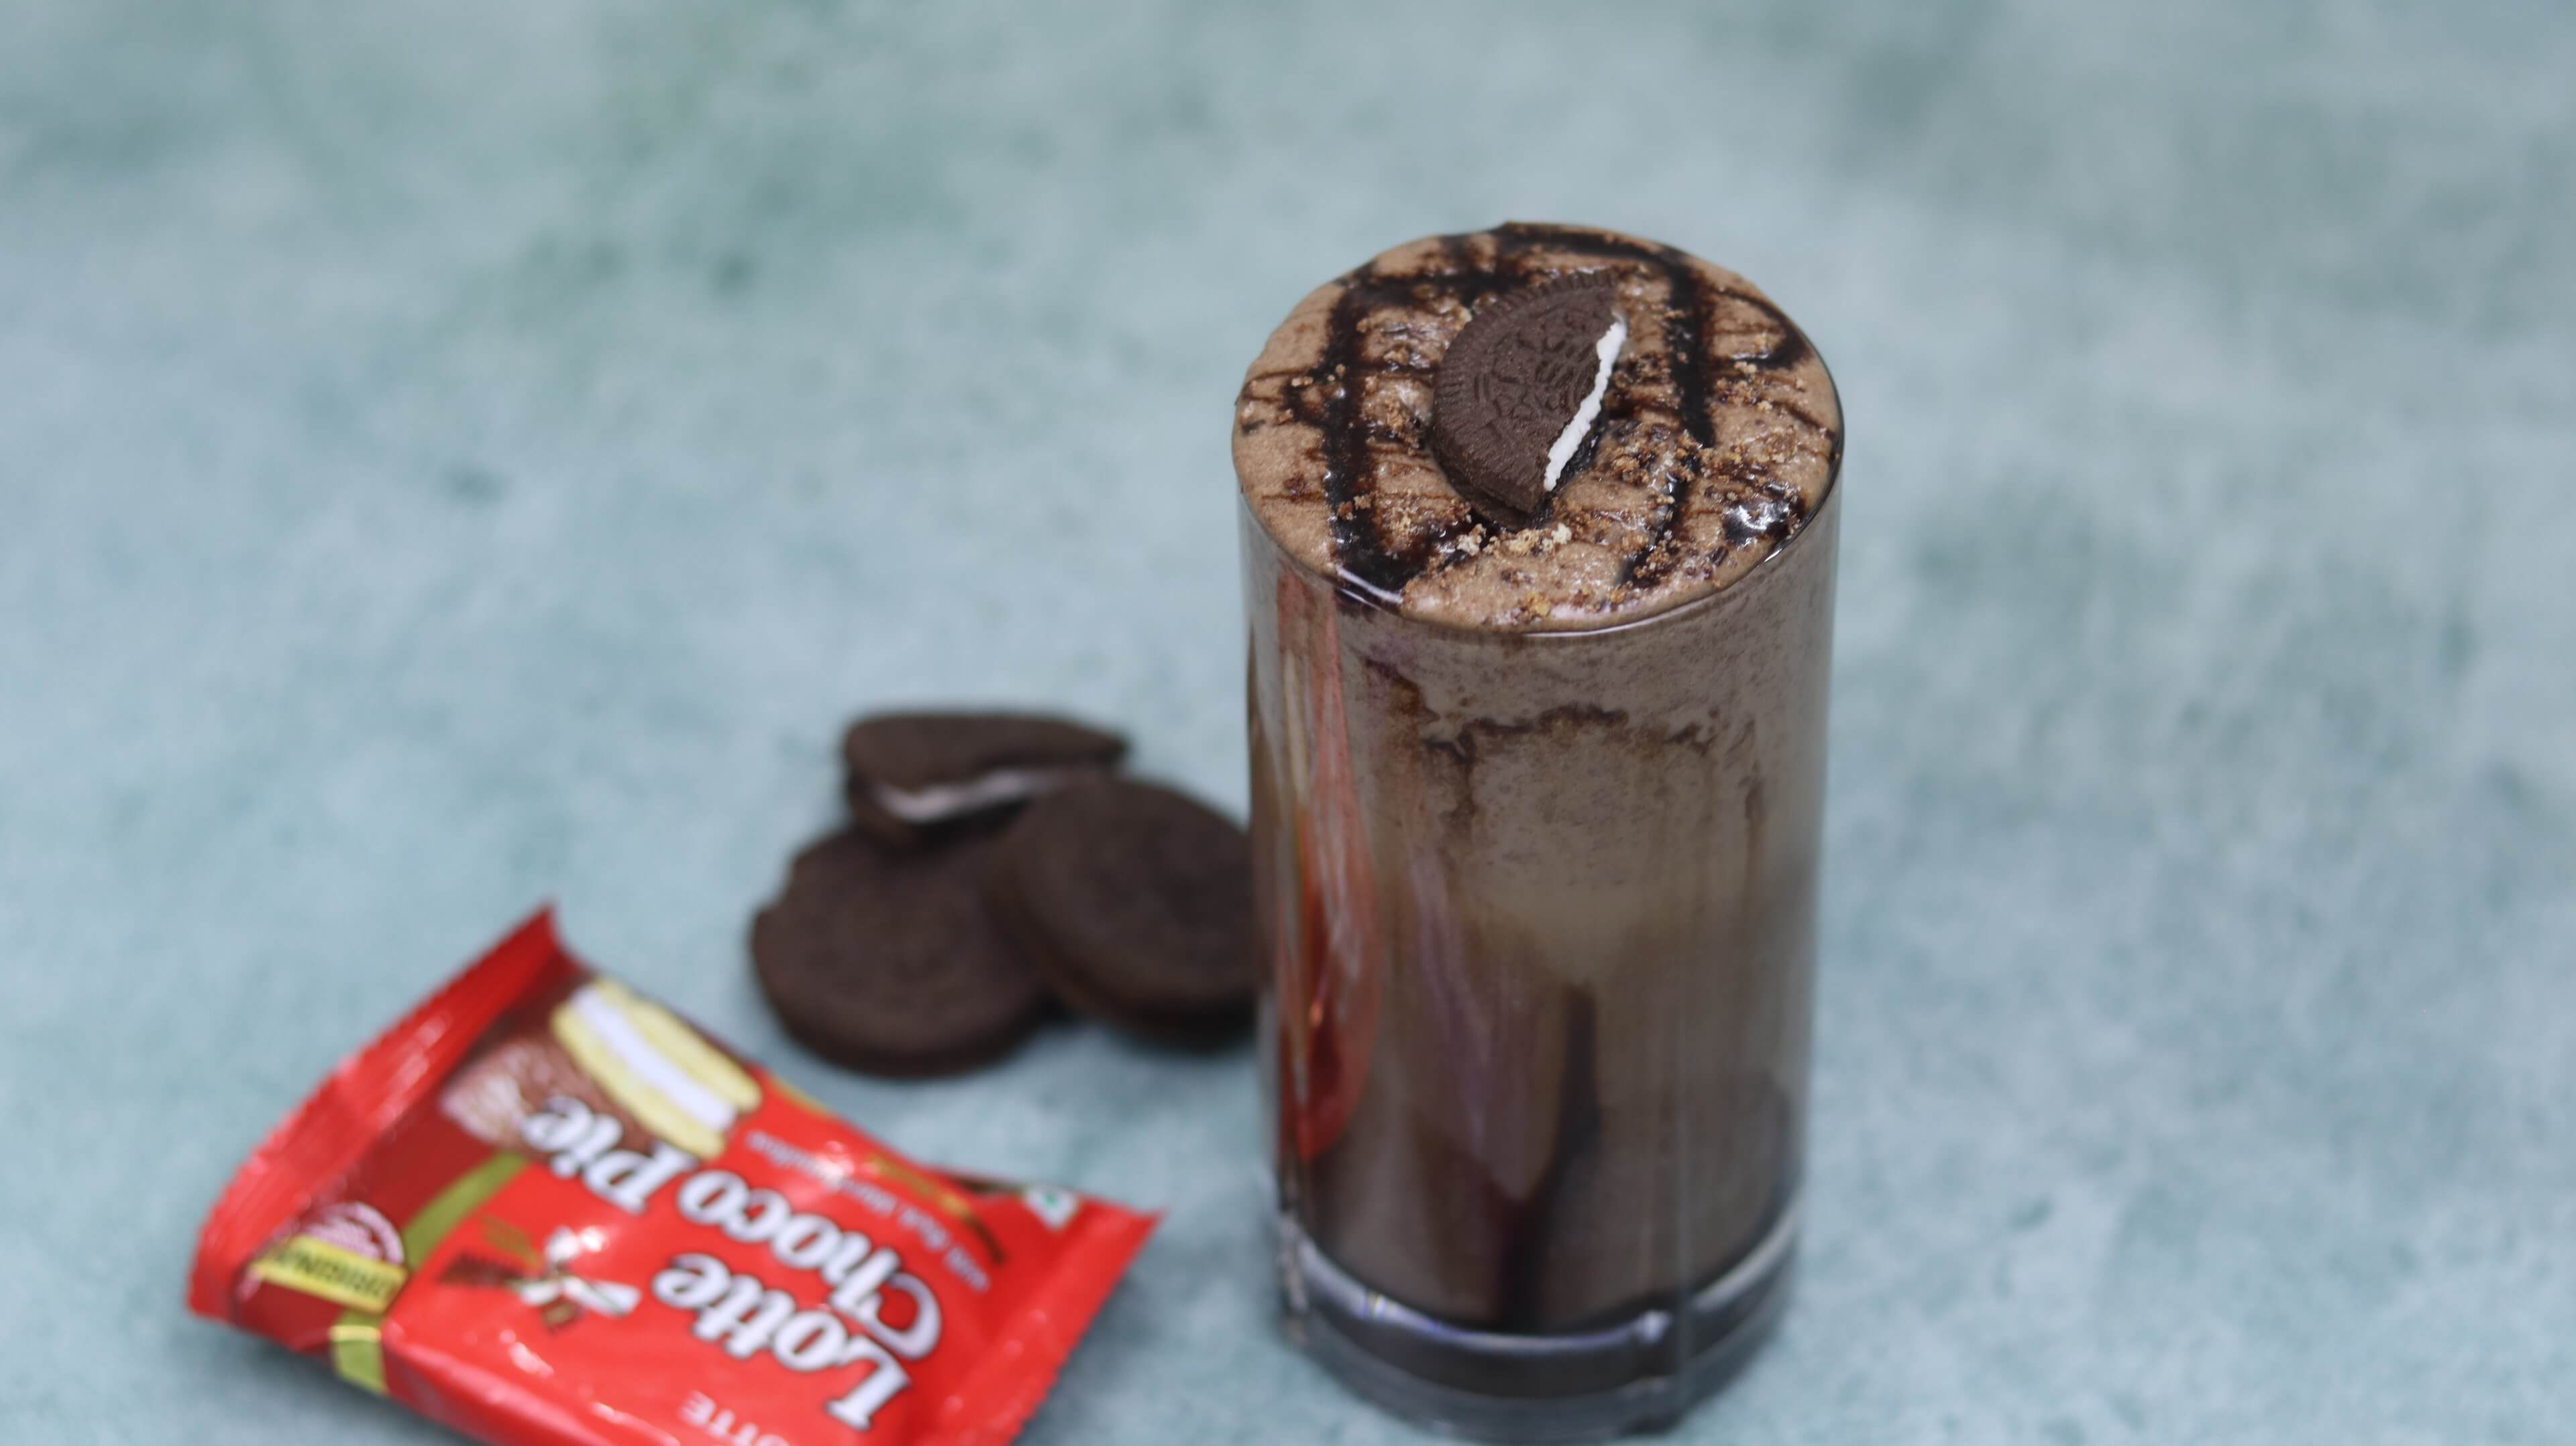 Decadent “Cake Shake” Is Making One Chicago Restaurant Even More Famous |  12 Tomatoes